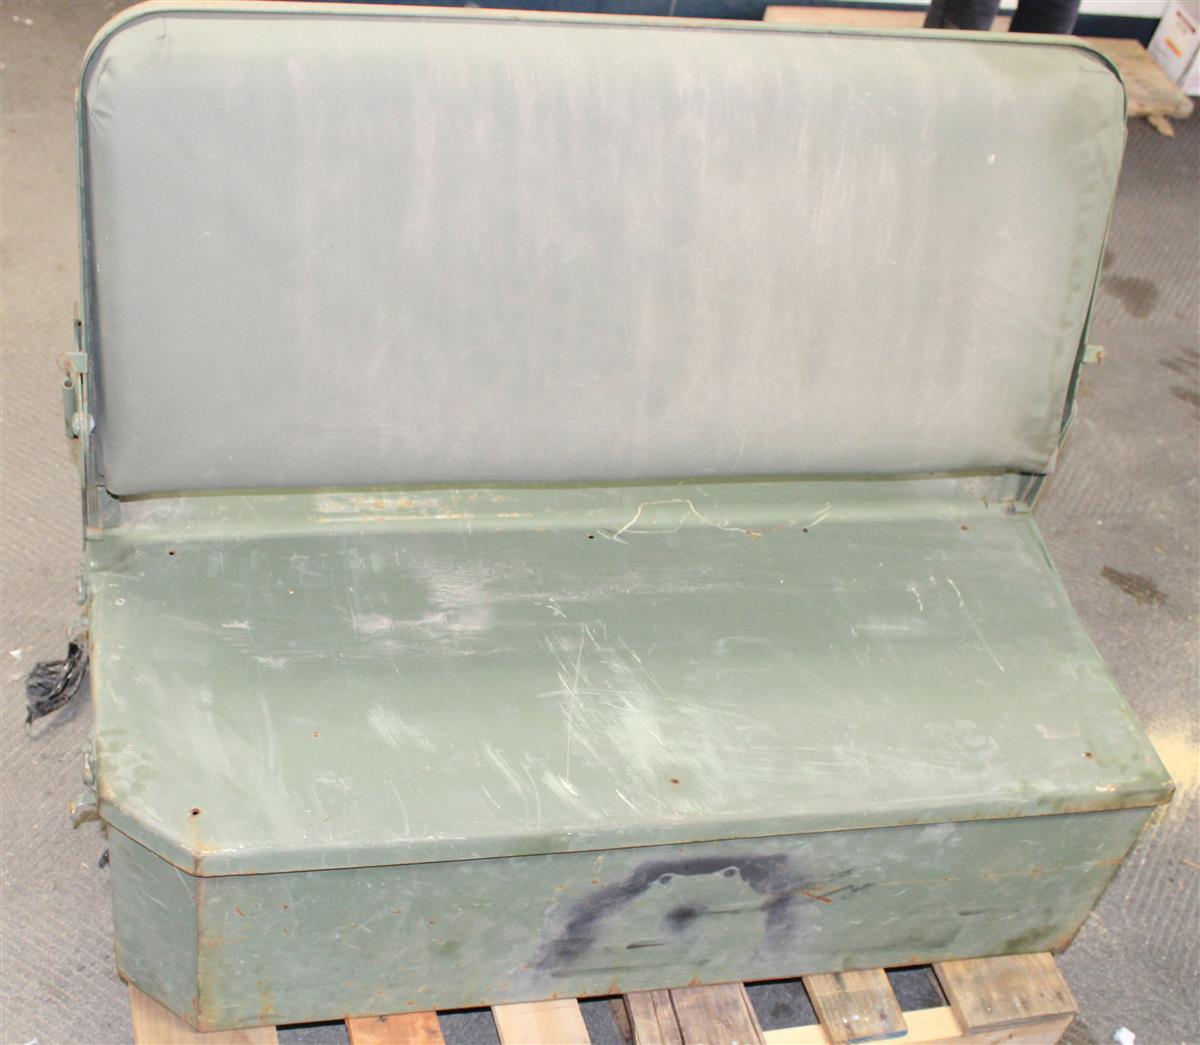 9M-110 | 9M-110 Passenger Bench Seat Battery Box Frame with Lid M939A1 M939A2 Update (2).JPG